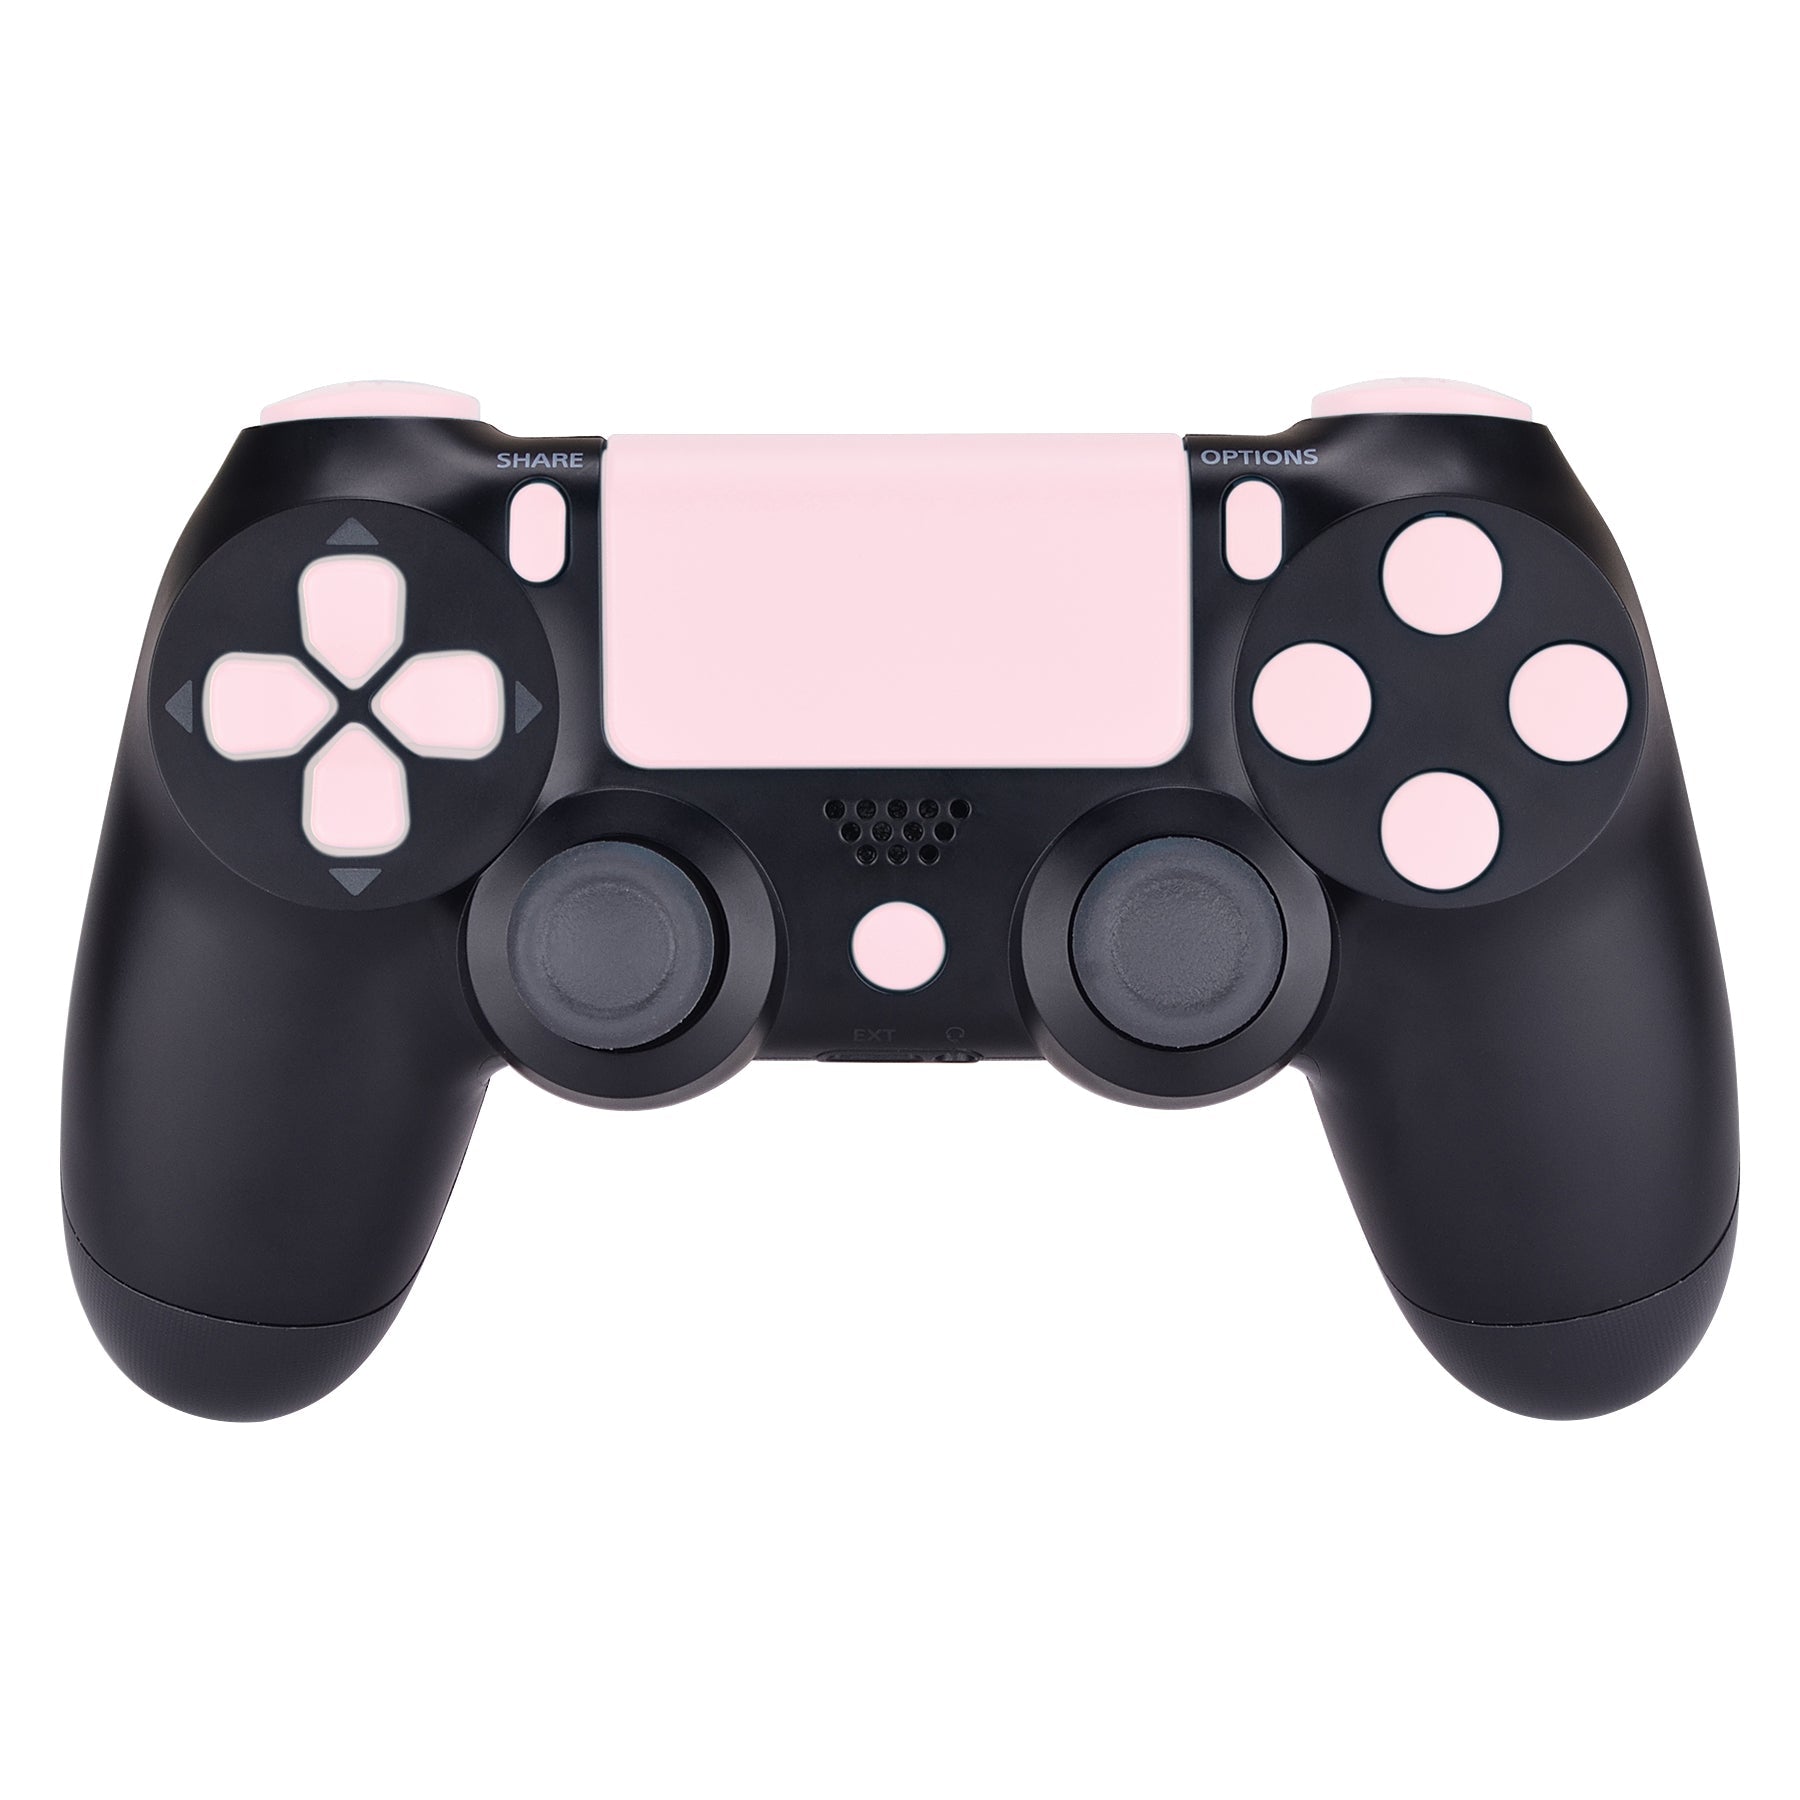 Controller, Kit Repair L2 ps4 Cherry Replacement Blossoms L1 eXtremeRate Set Pro Triggers D-pad Options for Controller Home Action Slim ps4 for Buttons R2 Touchpad Share Full R1 Buttons Pink – eXtremeRate